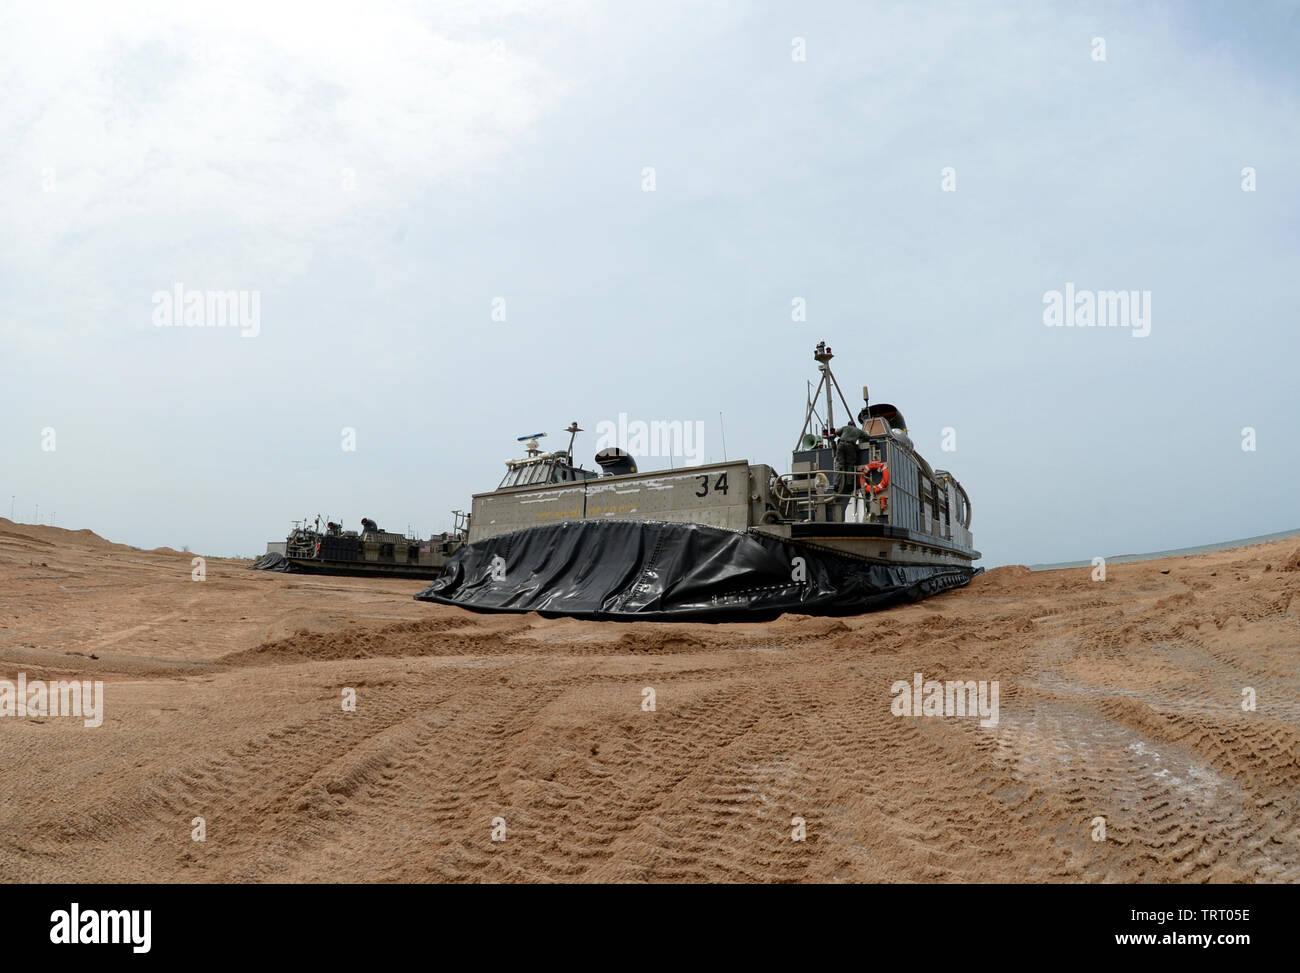 190609-N-WU565-240 - CAMP LEMONNIER, Djibouti - Two Landing Craft Air Cushion (LCAC) attached to the San Antonio-class amphibious transport dock ship USS Arlington (LPD-24), conducts a systems check after making landfall at Red Beach on base, June 9, 2019. The landing exercise is a requirement to certify the beach, demonstrate capabilities and readiness. Camp Lemonnier is an operational installation that enables U.S., allied and partner nation forces to be where and when they are needed to ensure security in Europe, Africa and Southwest Asia. (U.S. Navy photo by Mass Communication Specialist 2 Stock Photo